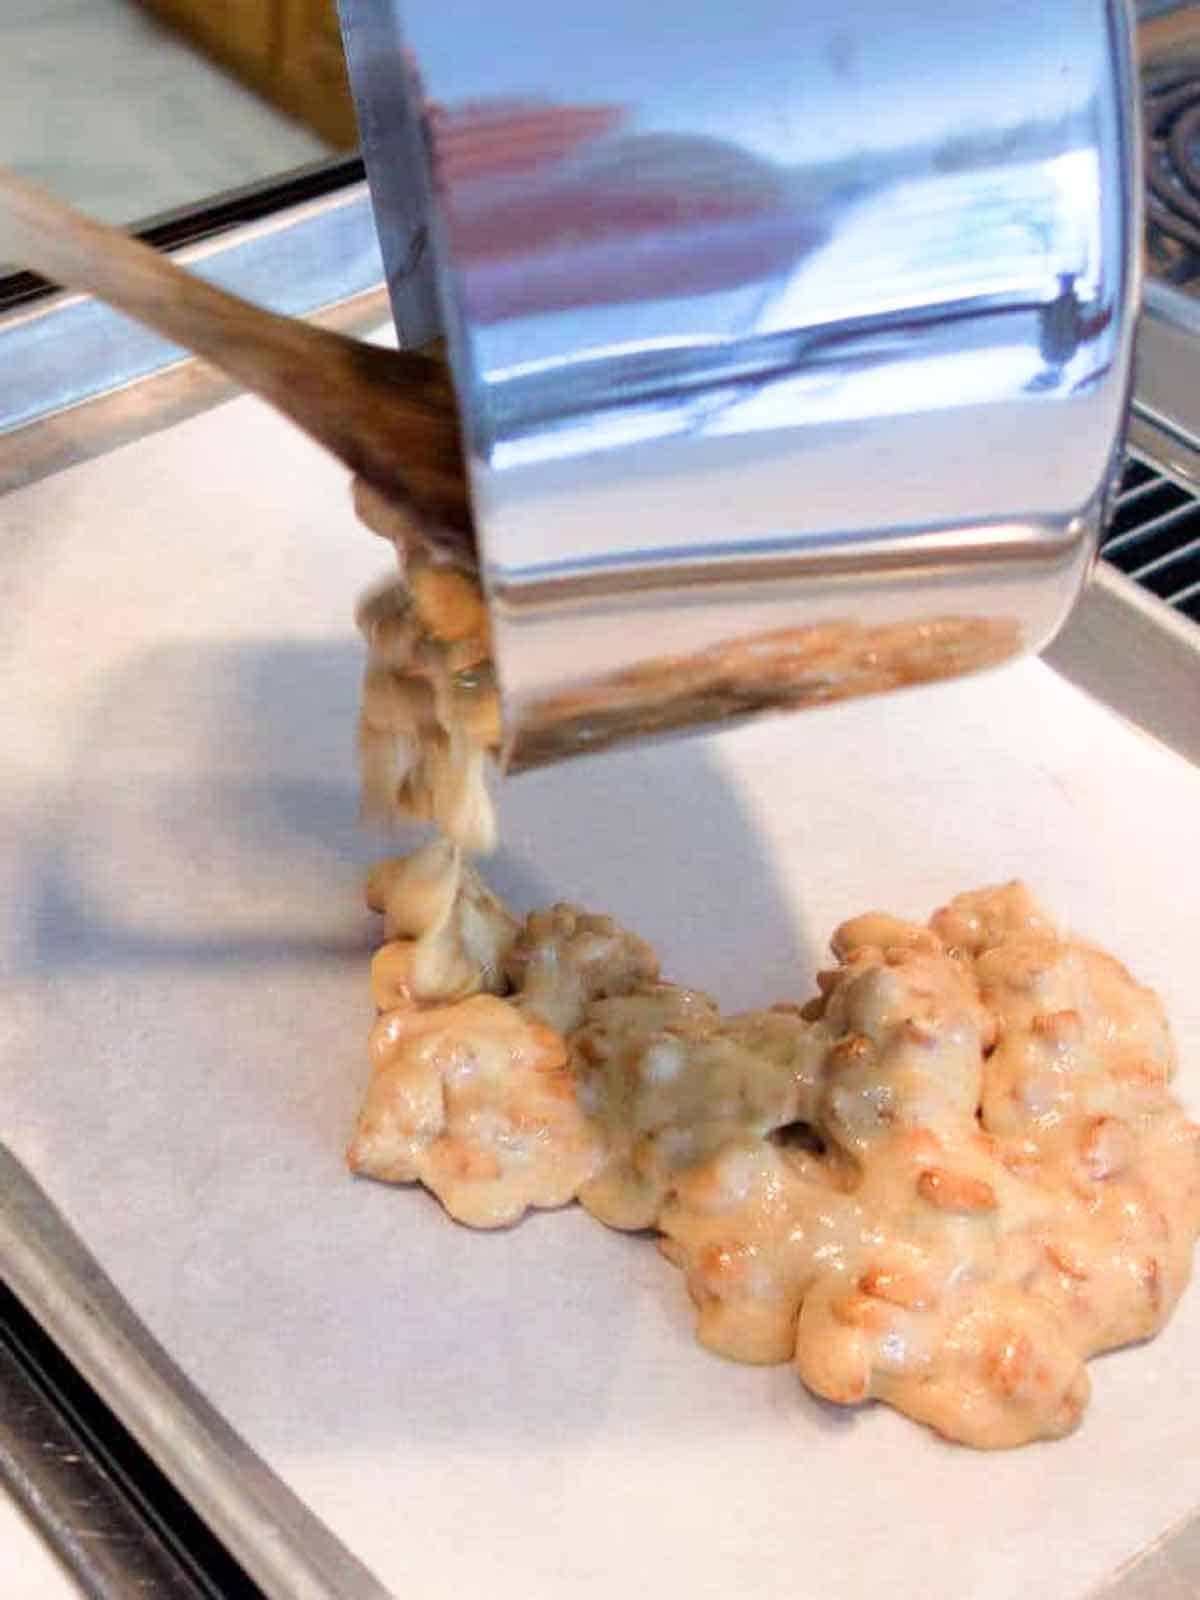 Pouring the peanut brittle on a heated parchment likned baking sheet.